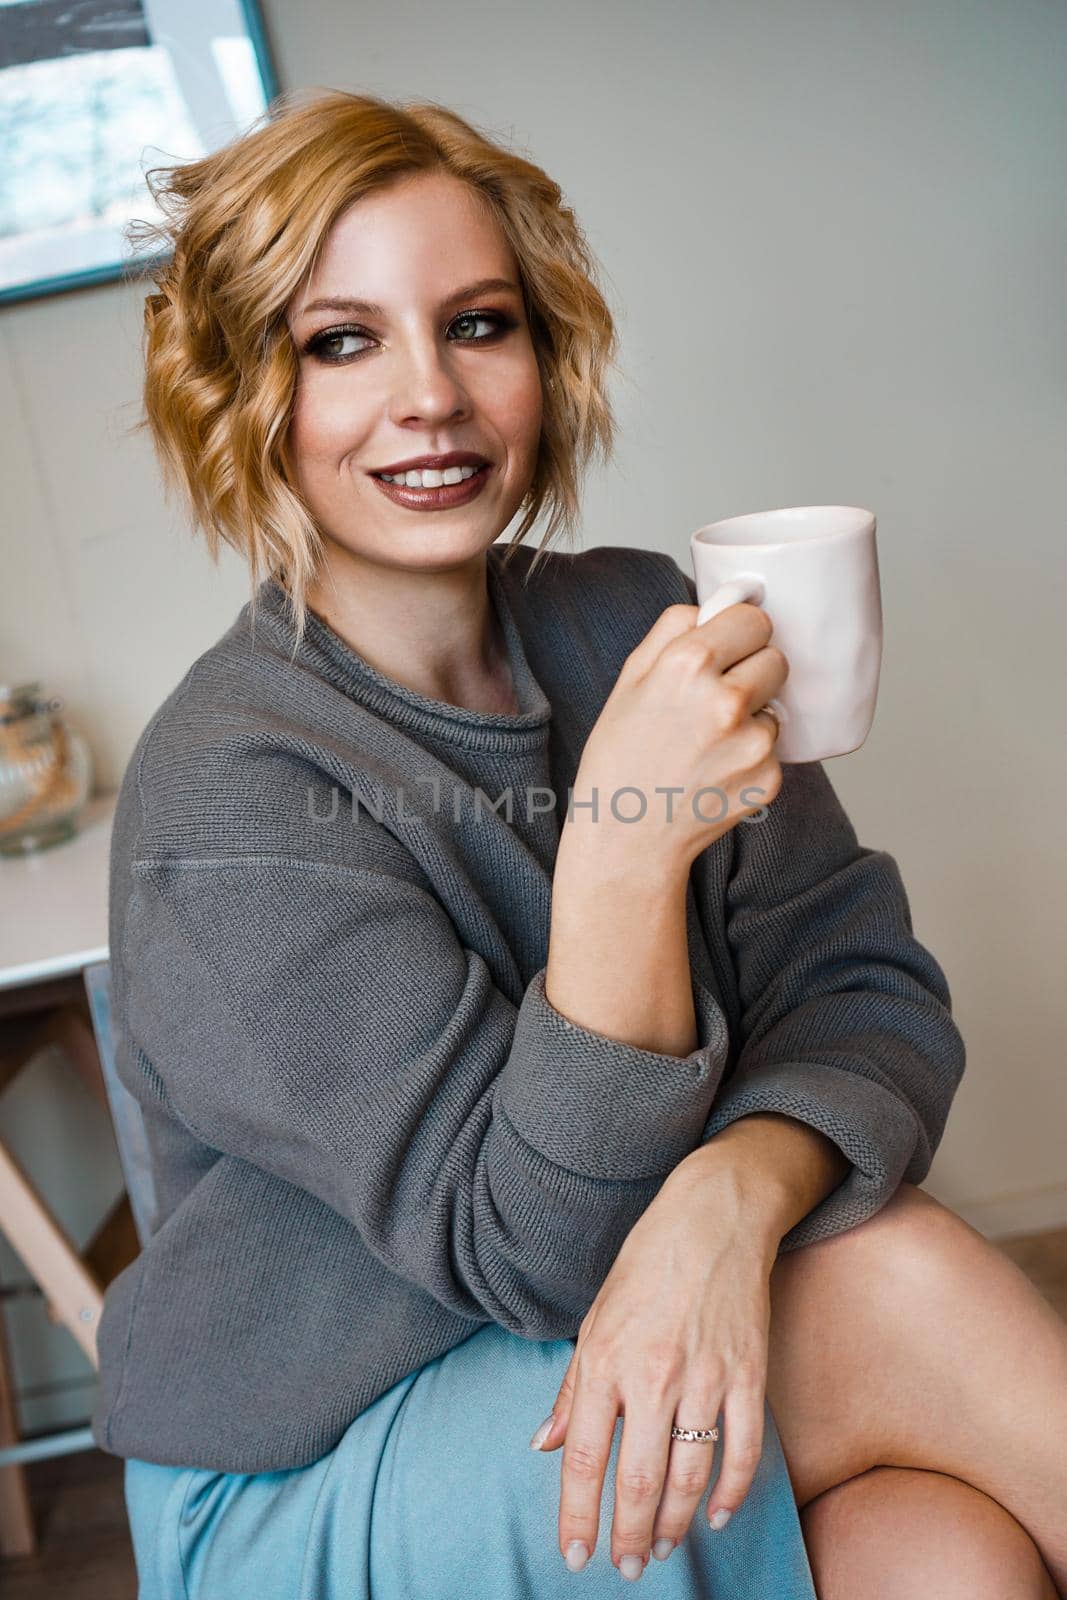 Smiling blonde drinking cappuccino, holding coffee cup. Vertical photo. Stay at home, cozy kitchen